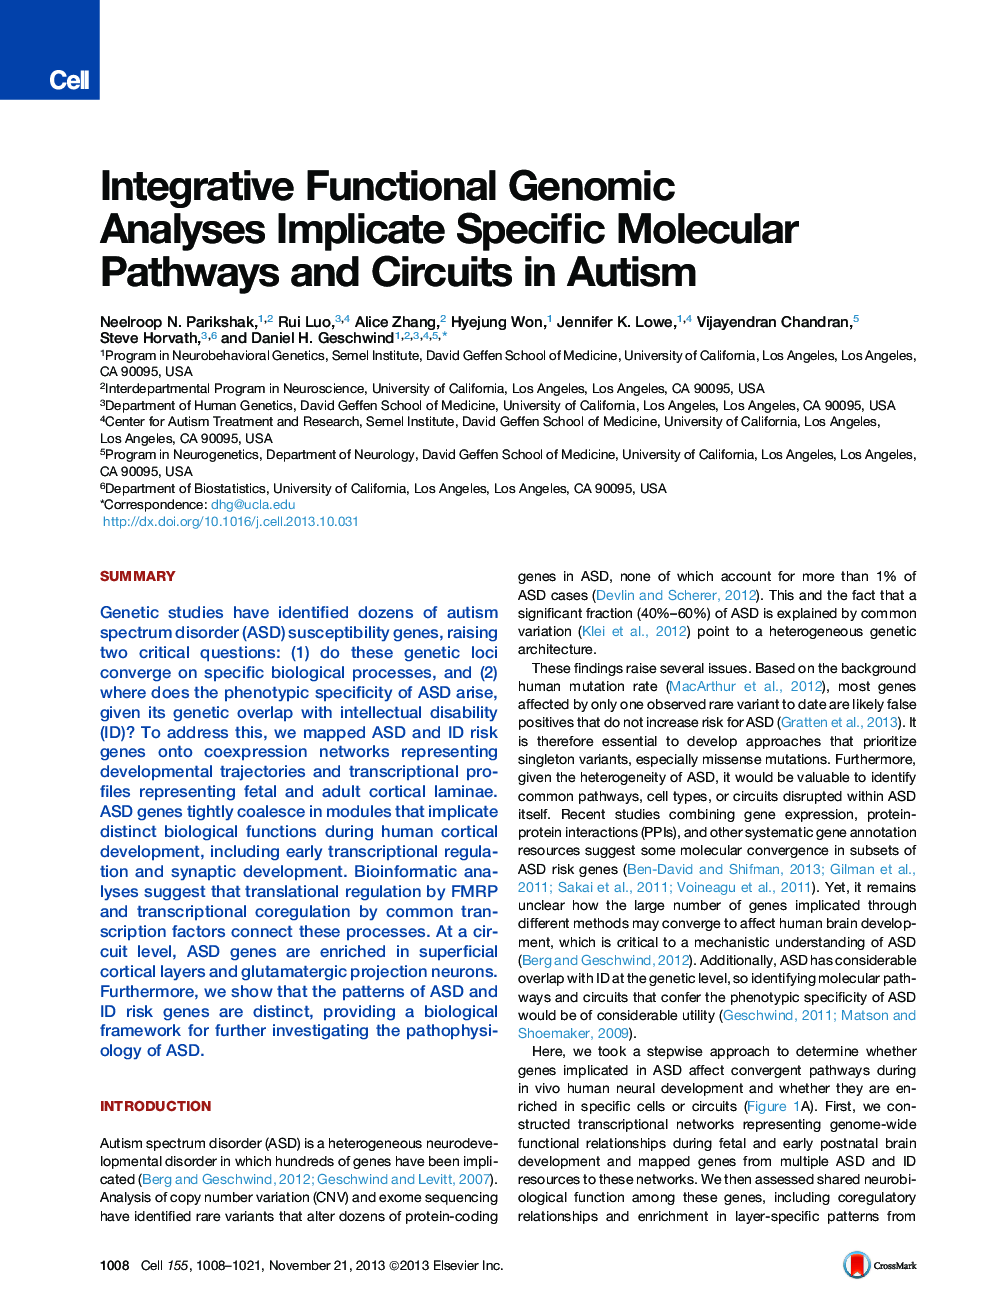 Integrative Functional Genomic Analyses Implicate Specific Molecular Pathways and Circuits in Autism